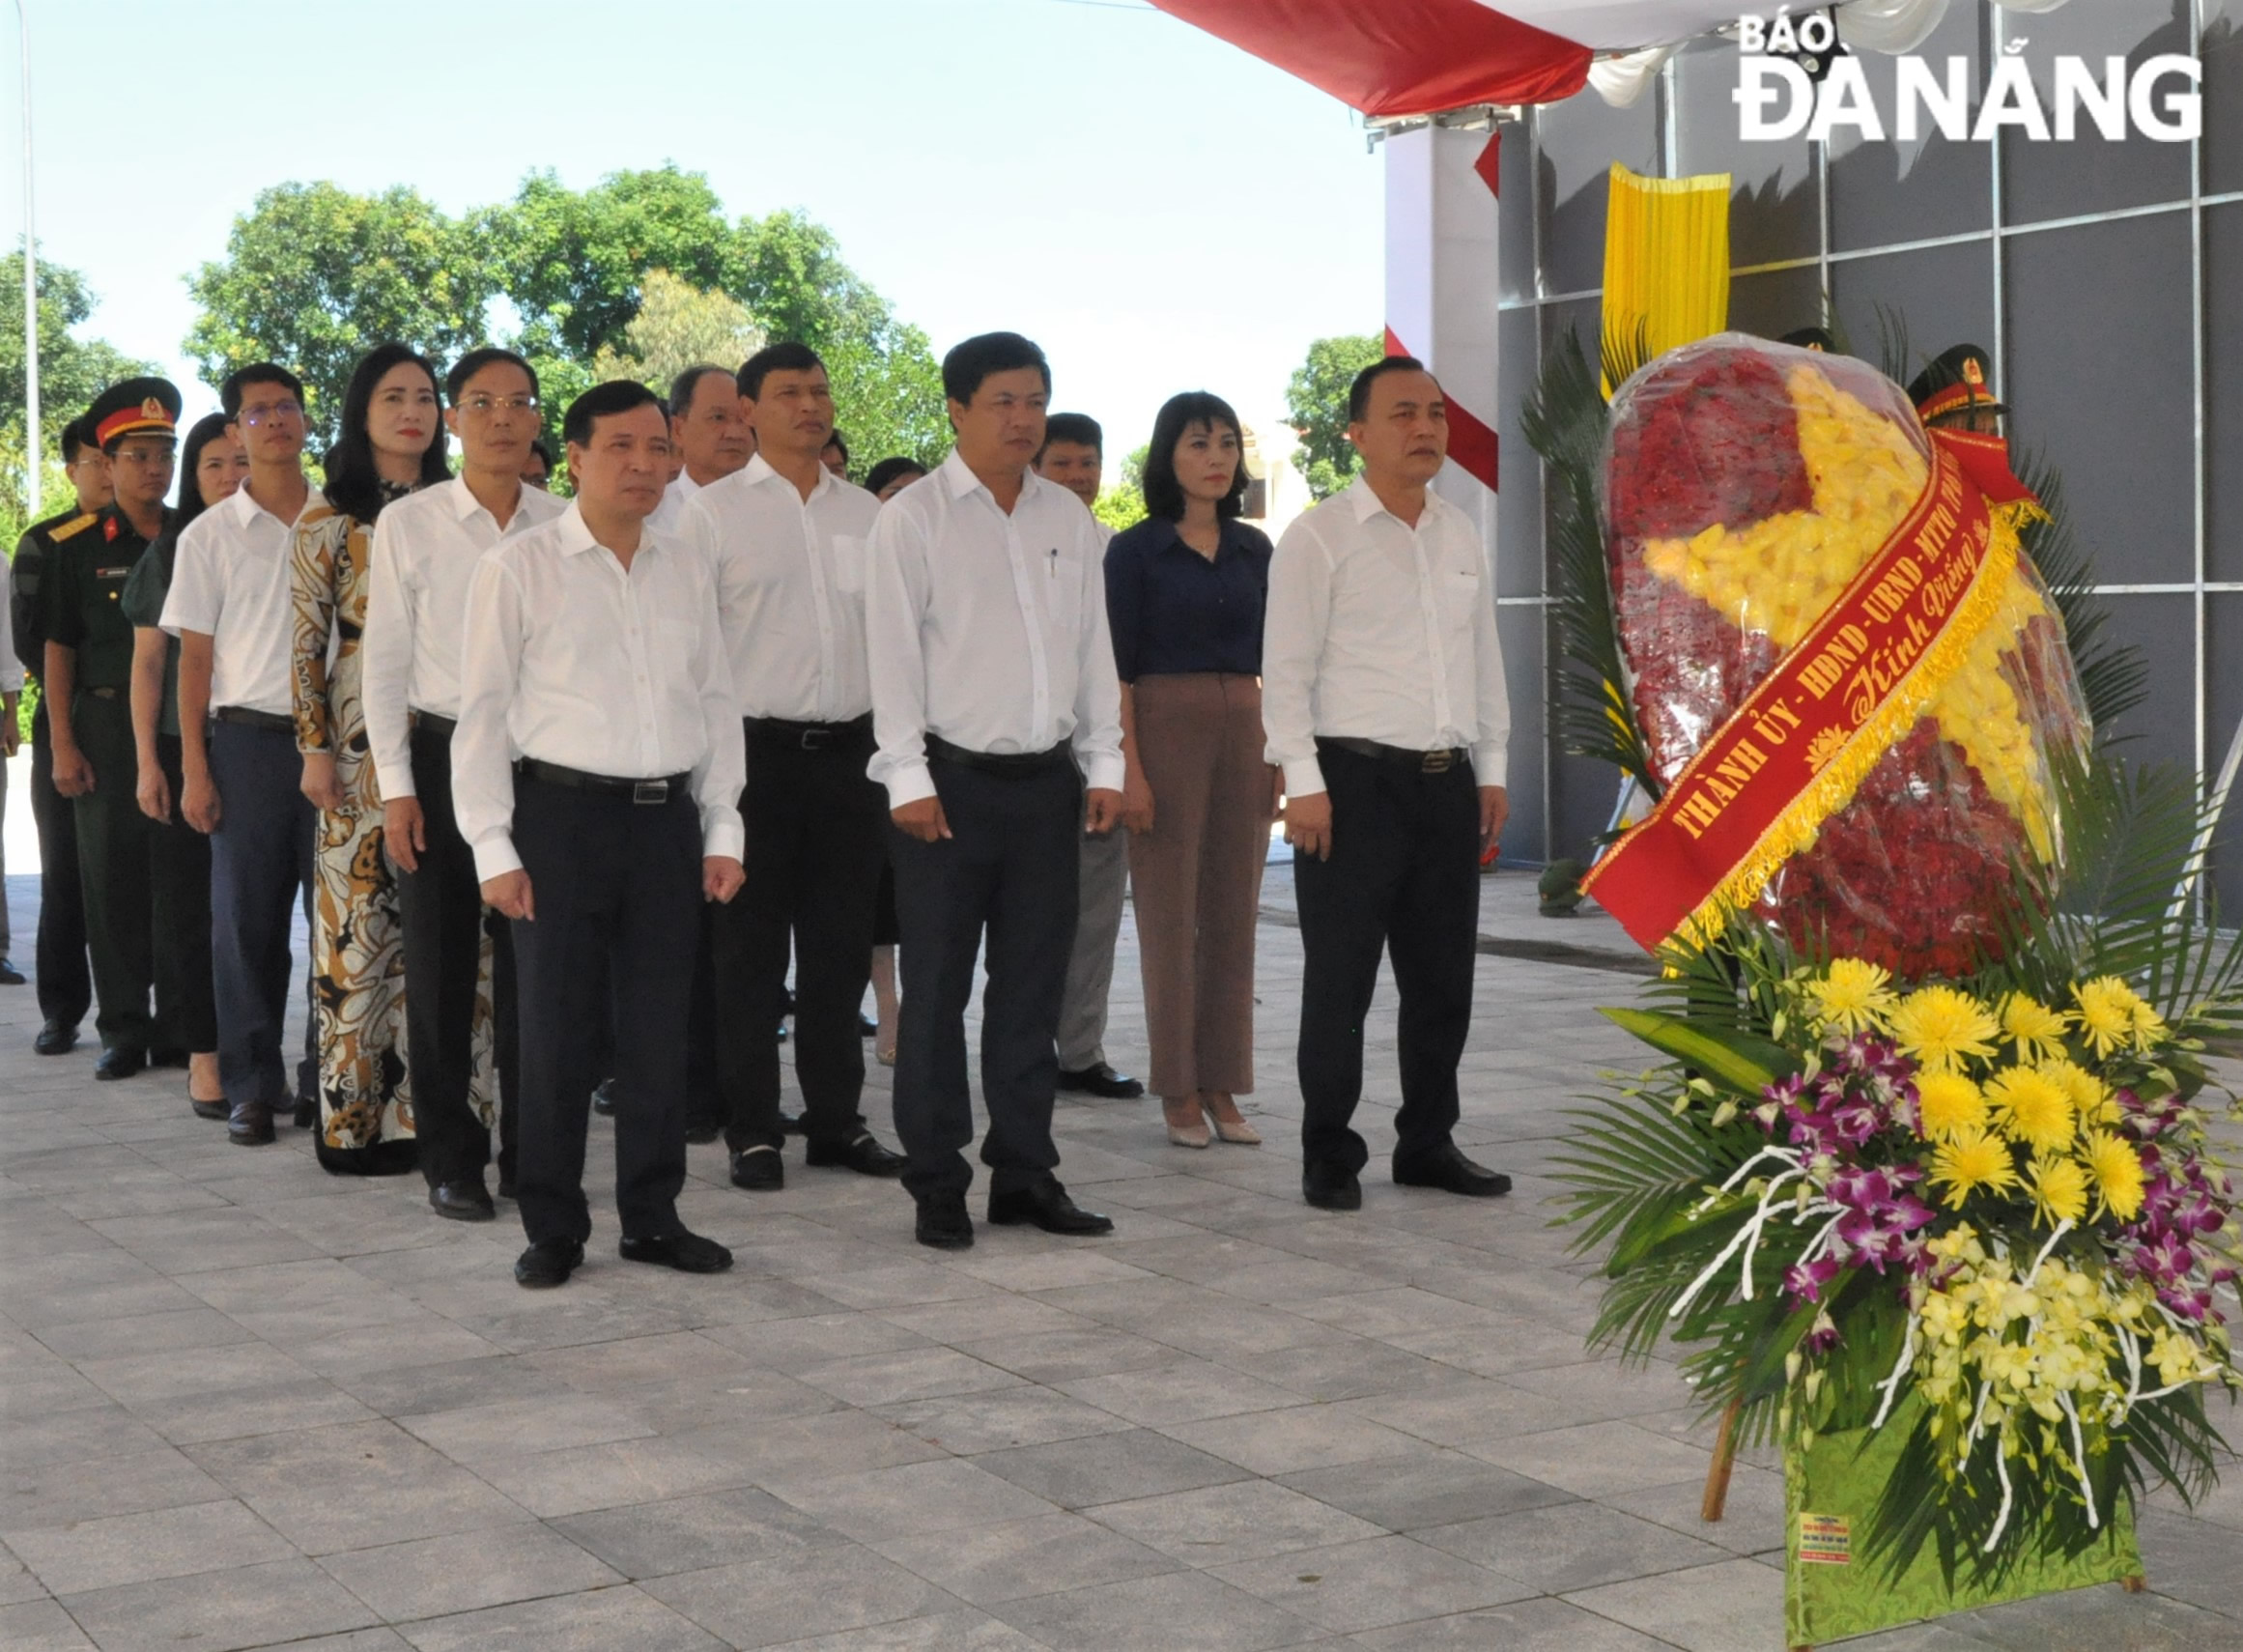 Leaders of Da Nang and Thanh Hoa Province offering flowers and incense at the Quang Xuong District Martyrs’ Cemetery. Photo: LE HUNG